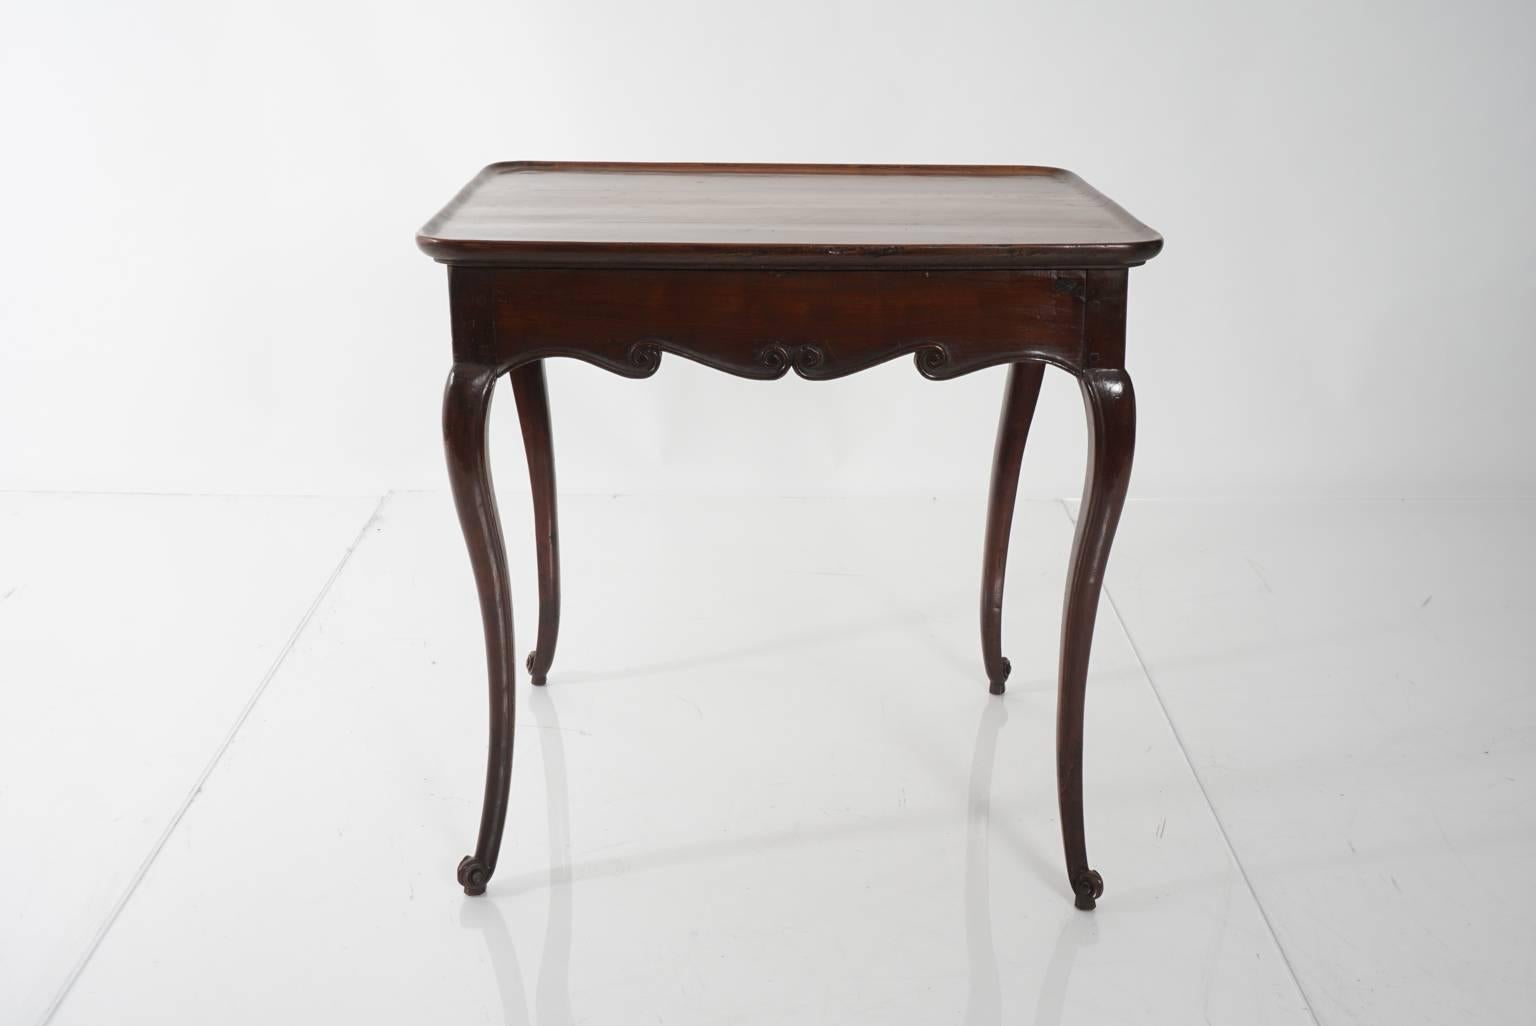 French mahogany, single drawer tea table with scalloped apron and cabriole legs, circa 1800s.